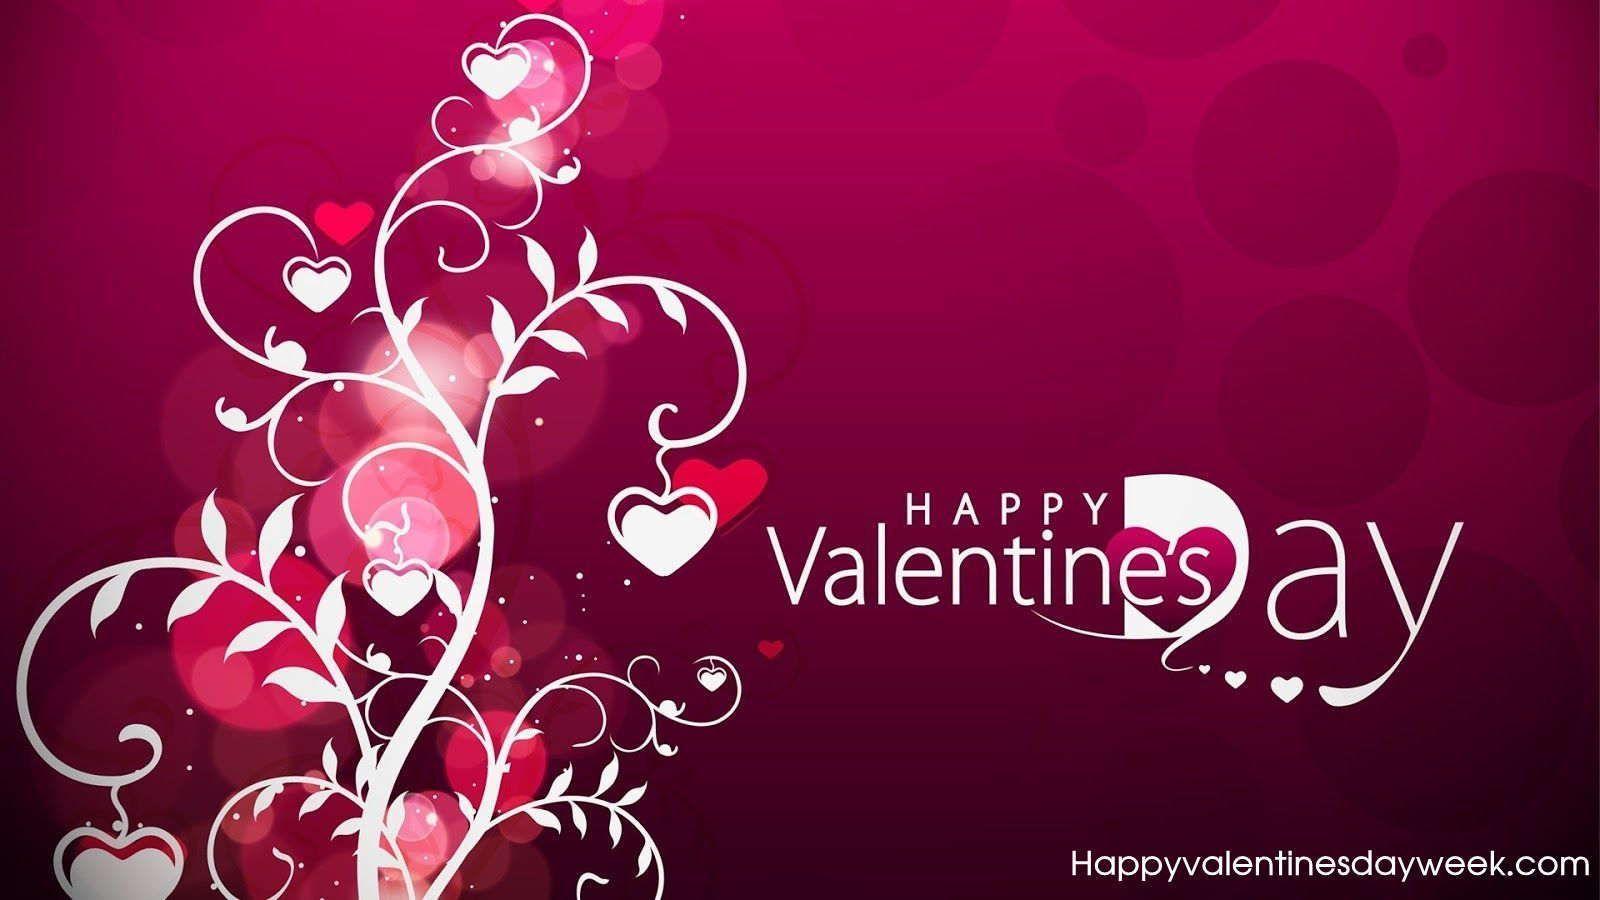 Happy Valentines Day 2017 Image Pictures Quotes Messages HD